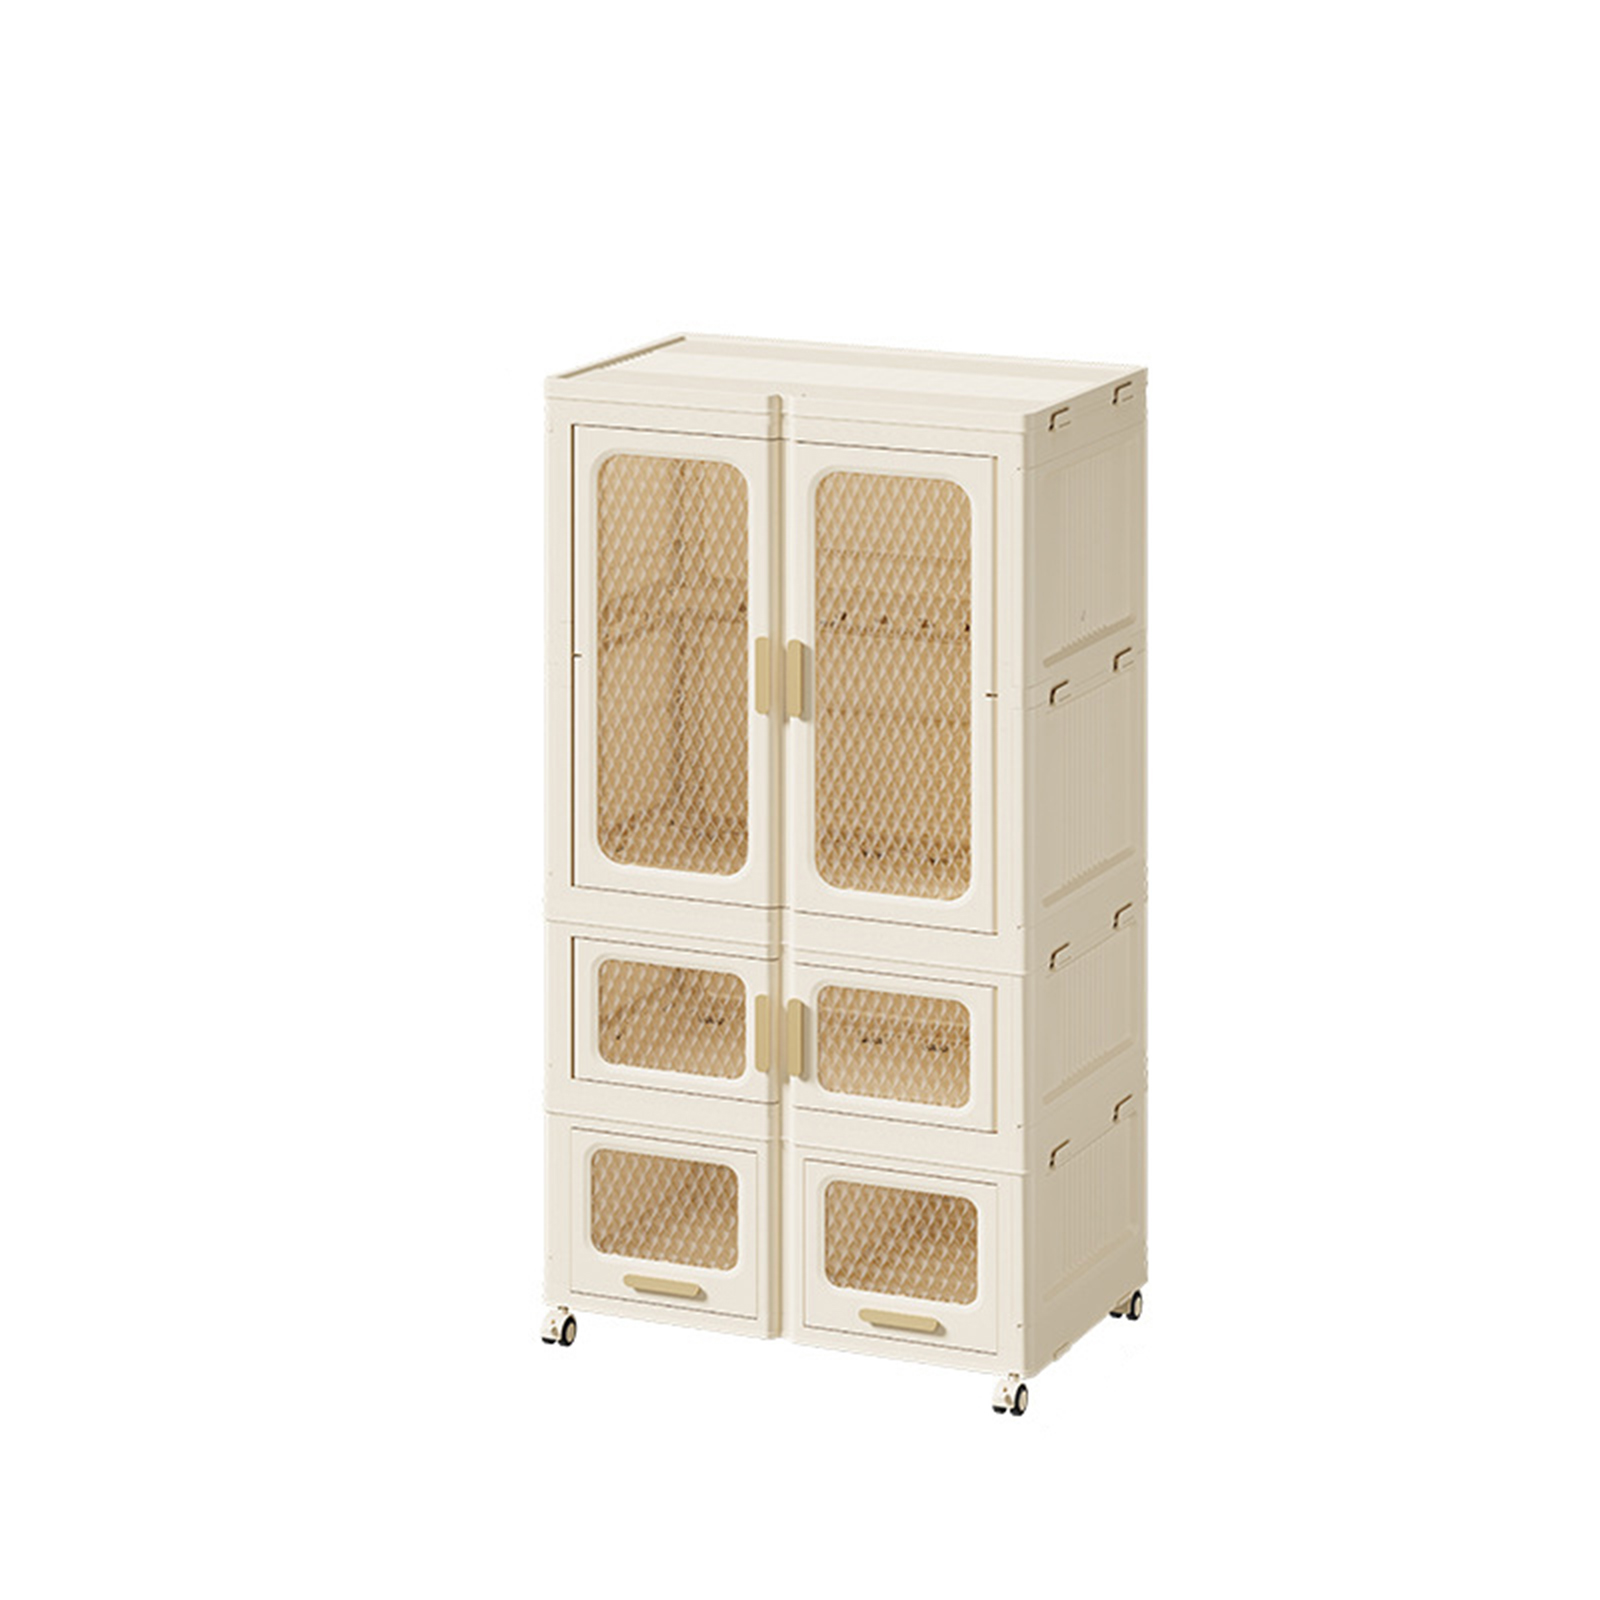 1 layer wardrobe   1 layer Double door   1 layer Chest of Drawers [Extra large]